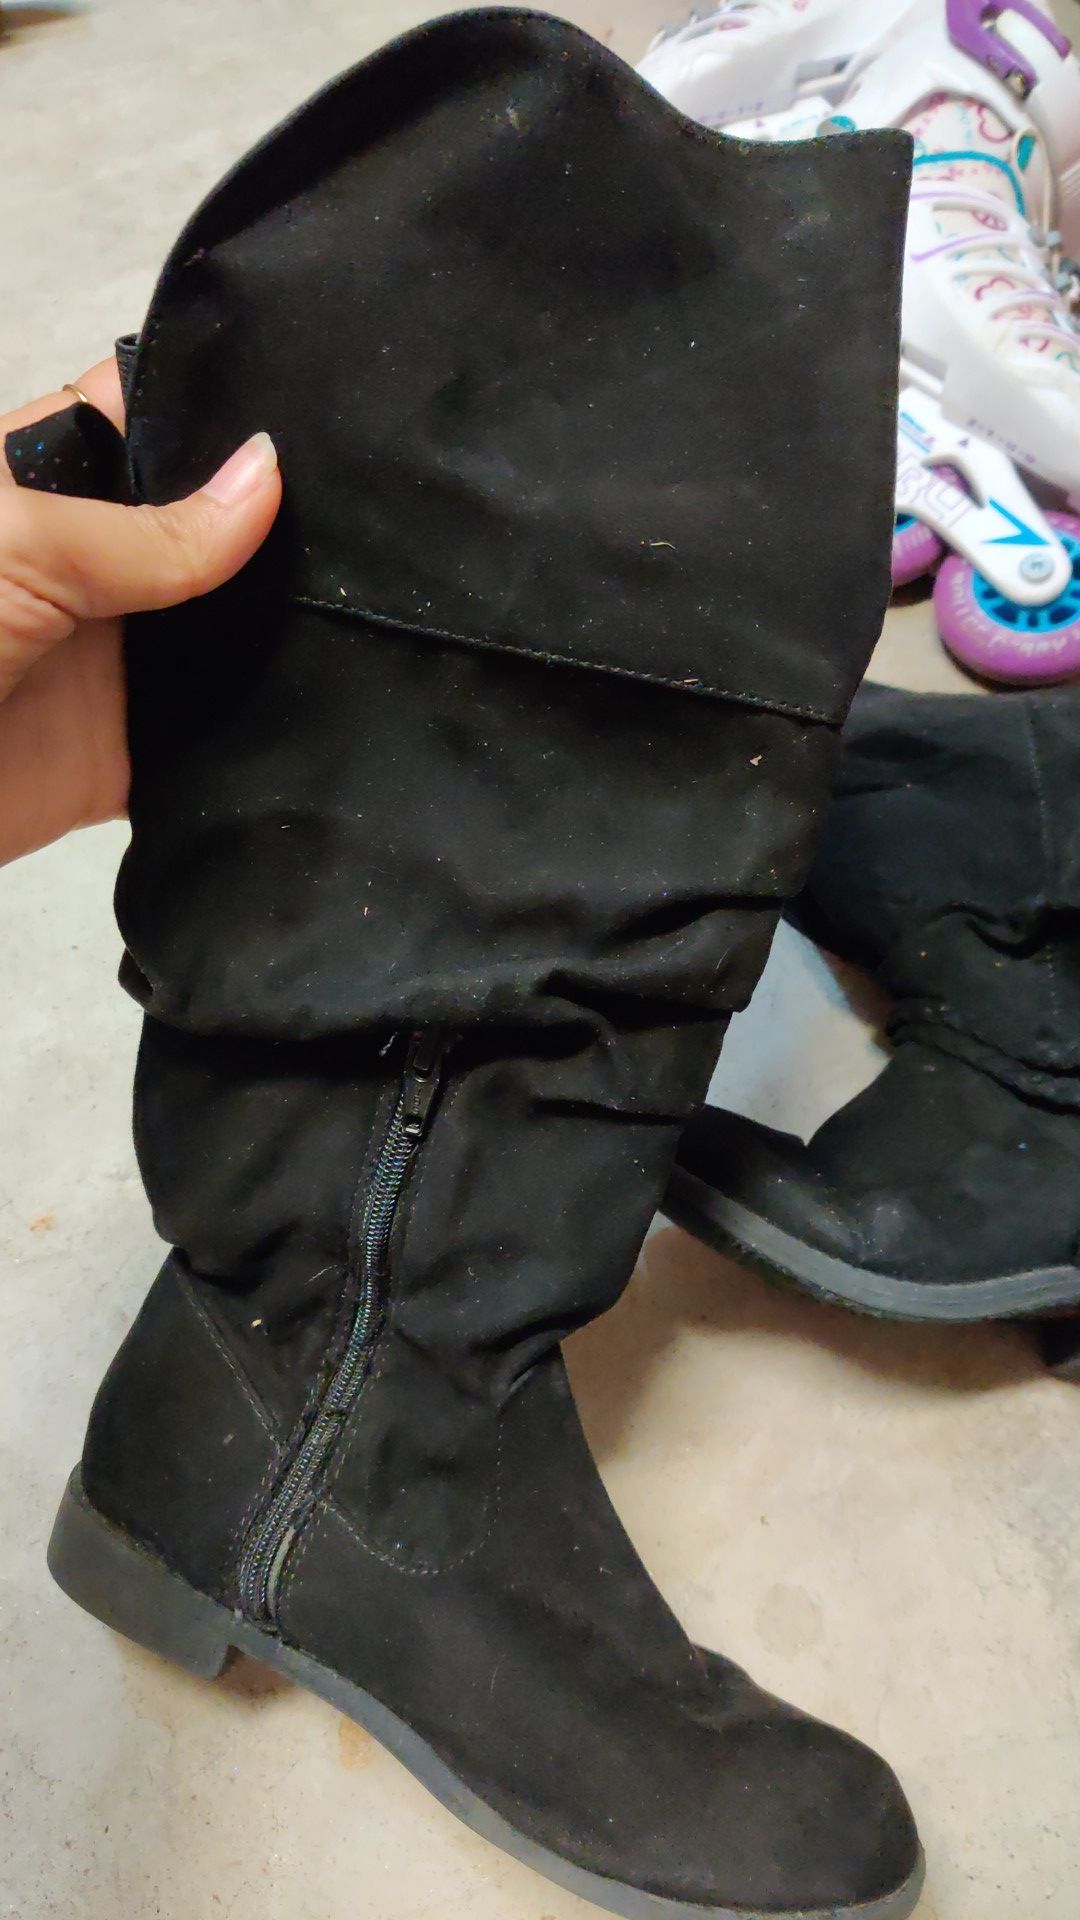 Girl size 12 $5 boots